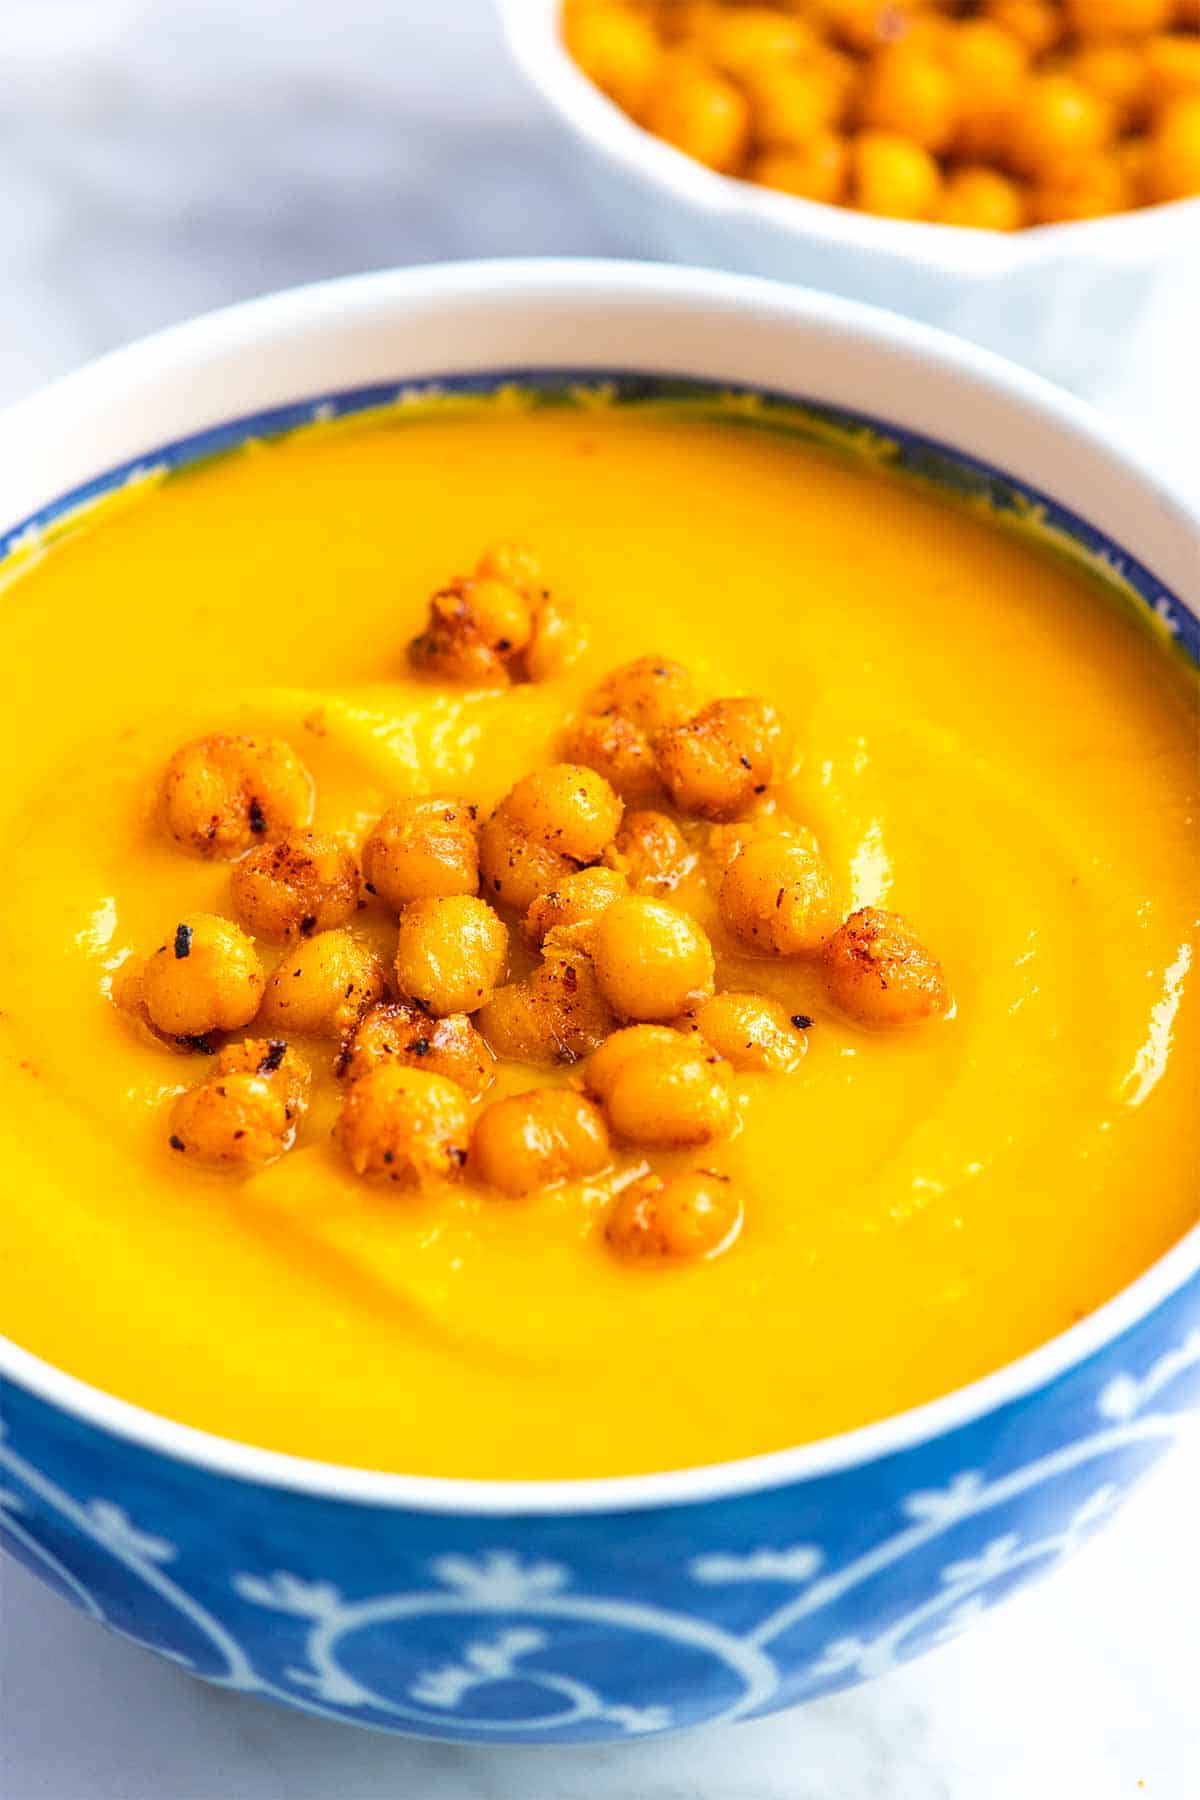 This easy butternut squash soup is unbelievably creamy, satisfying, and so flavorful. It's also very simple to make, delicious when made in advance, and naturally vegan.